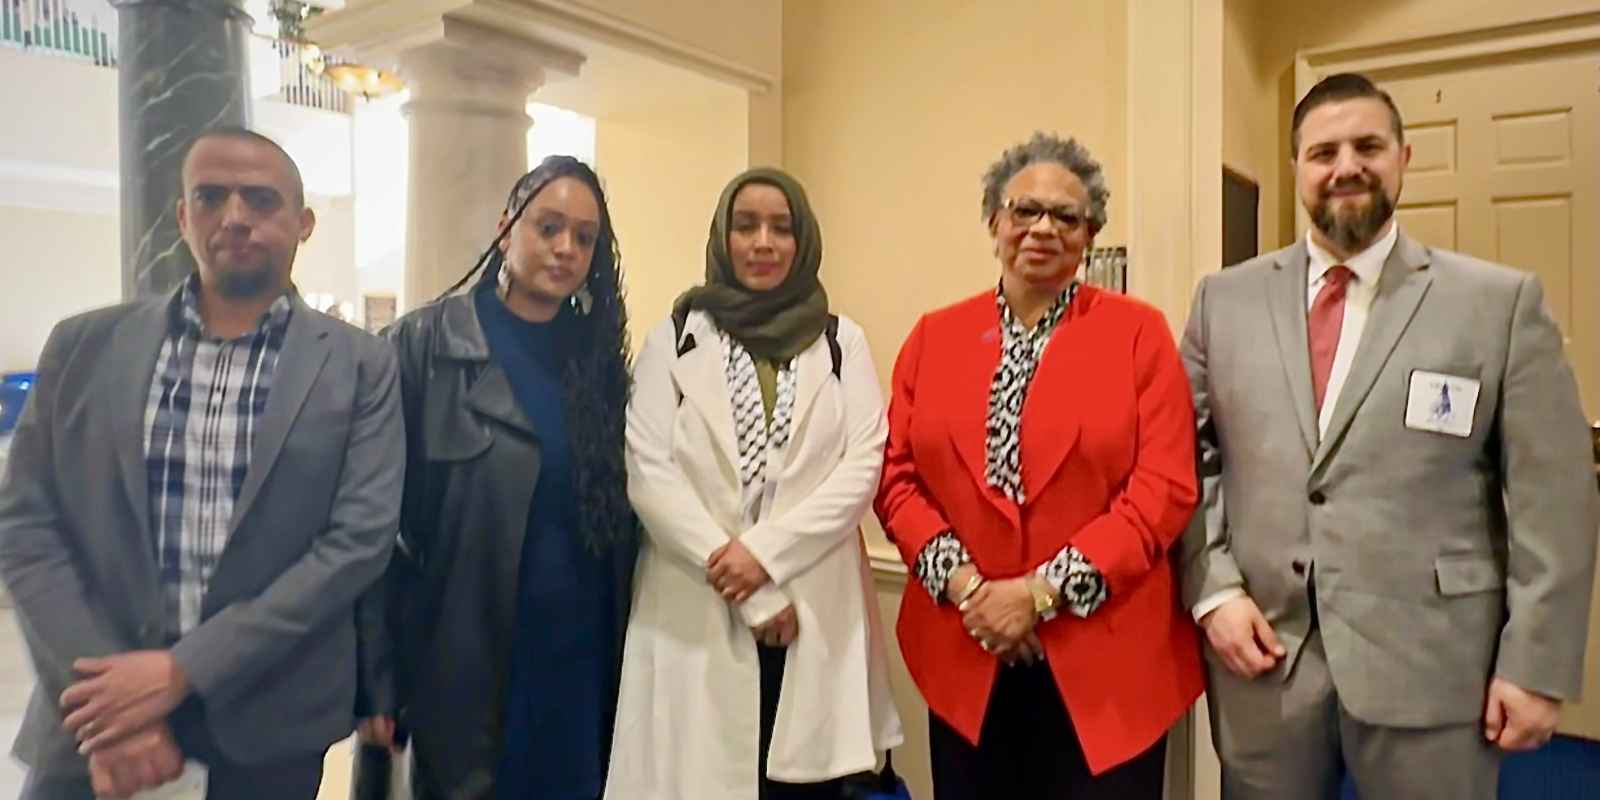 Dana Vickers Shelley is in Annapolis in a group photo with two staff from CAIR and Sergio España and Yanet Amaneual from the ACLU of Maryland.